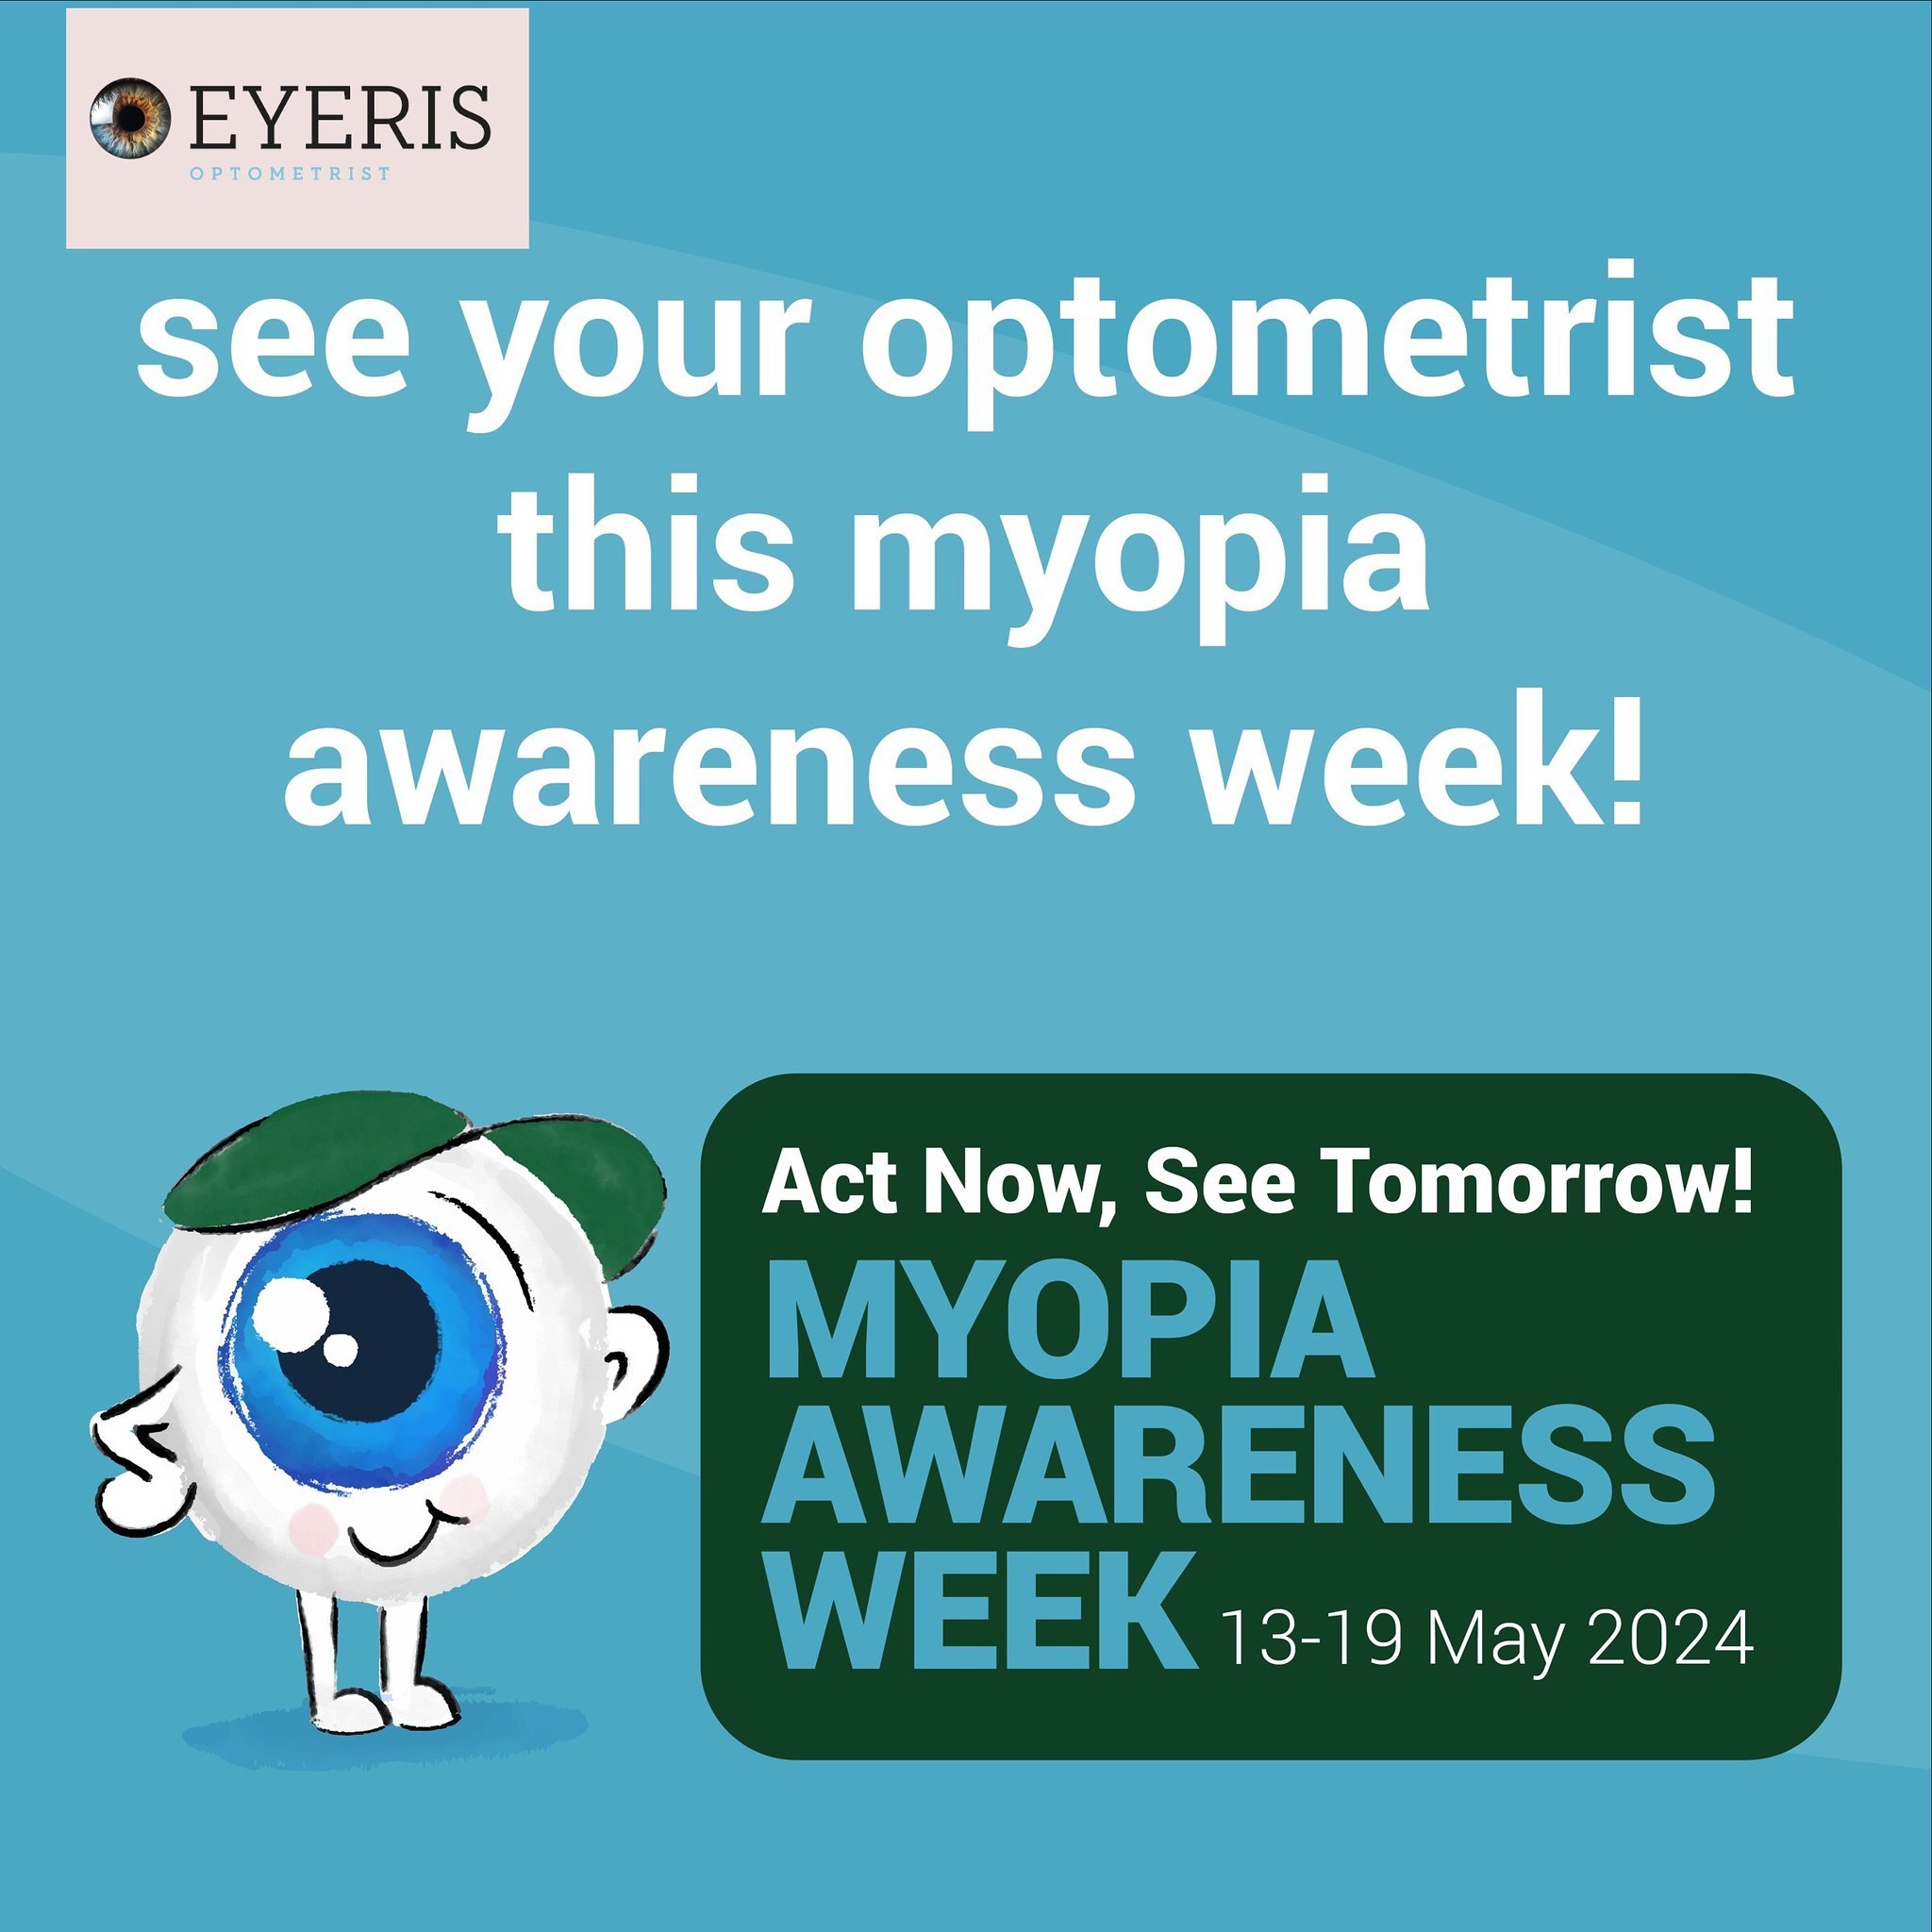 Beyond just blurry vision, myopia (short sightedness) encompasses deeper concerns like pathological myopia, affecting eye health. In 2020, 30% had myopia, projected to hit 50% by 2050! Take control, especially for kids when progression risk is highes